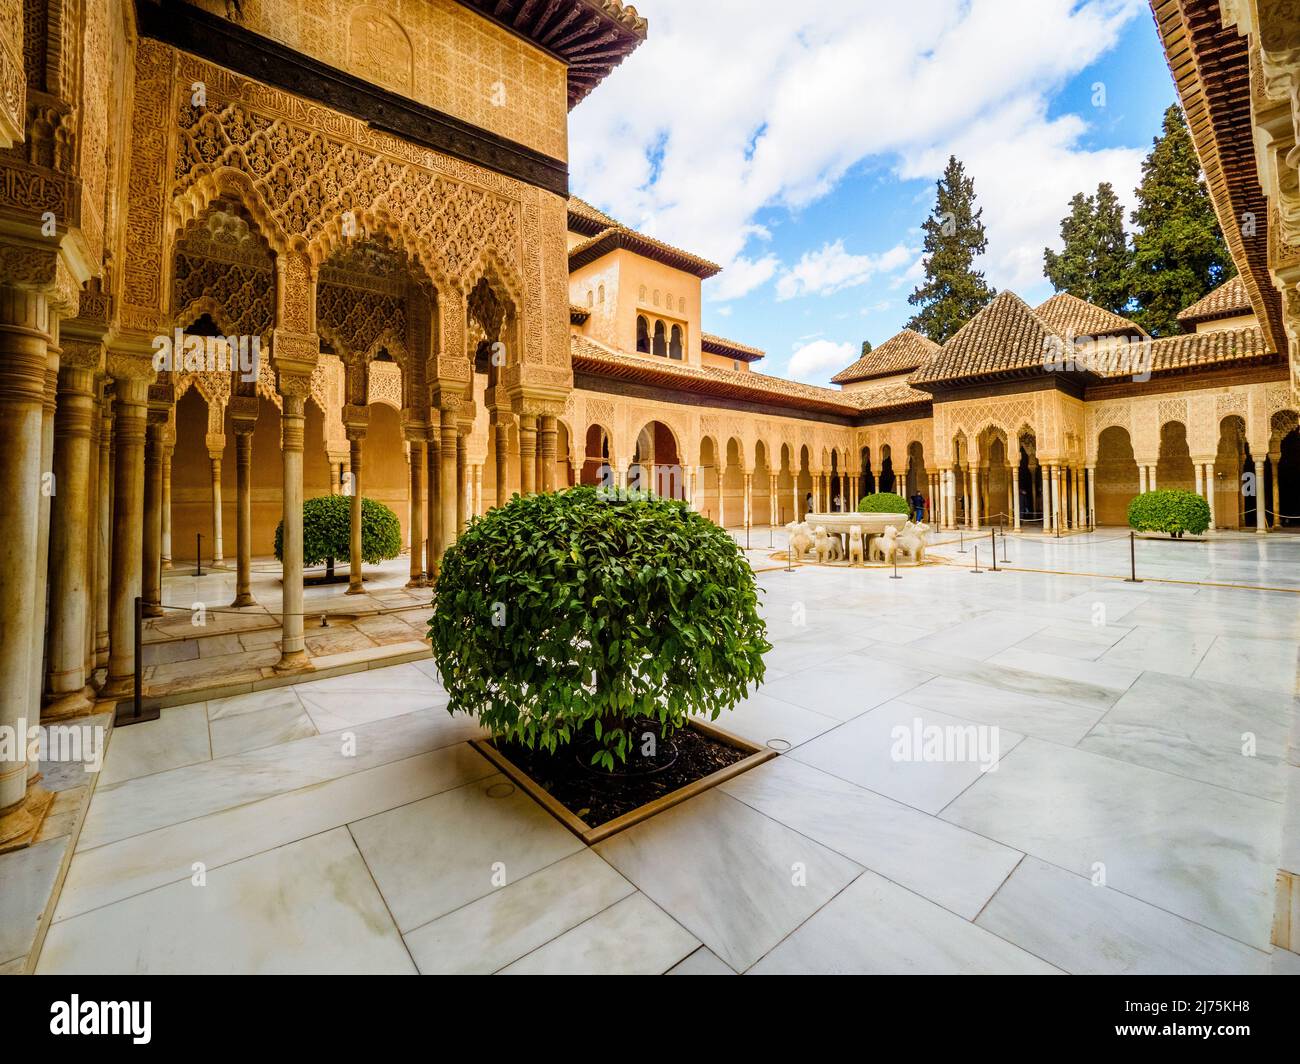 Court of the Lions in the Nasrid royal palaces complex - Alhambra complex - Granada, Spain Stock Photo